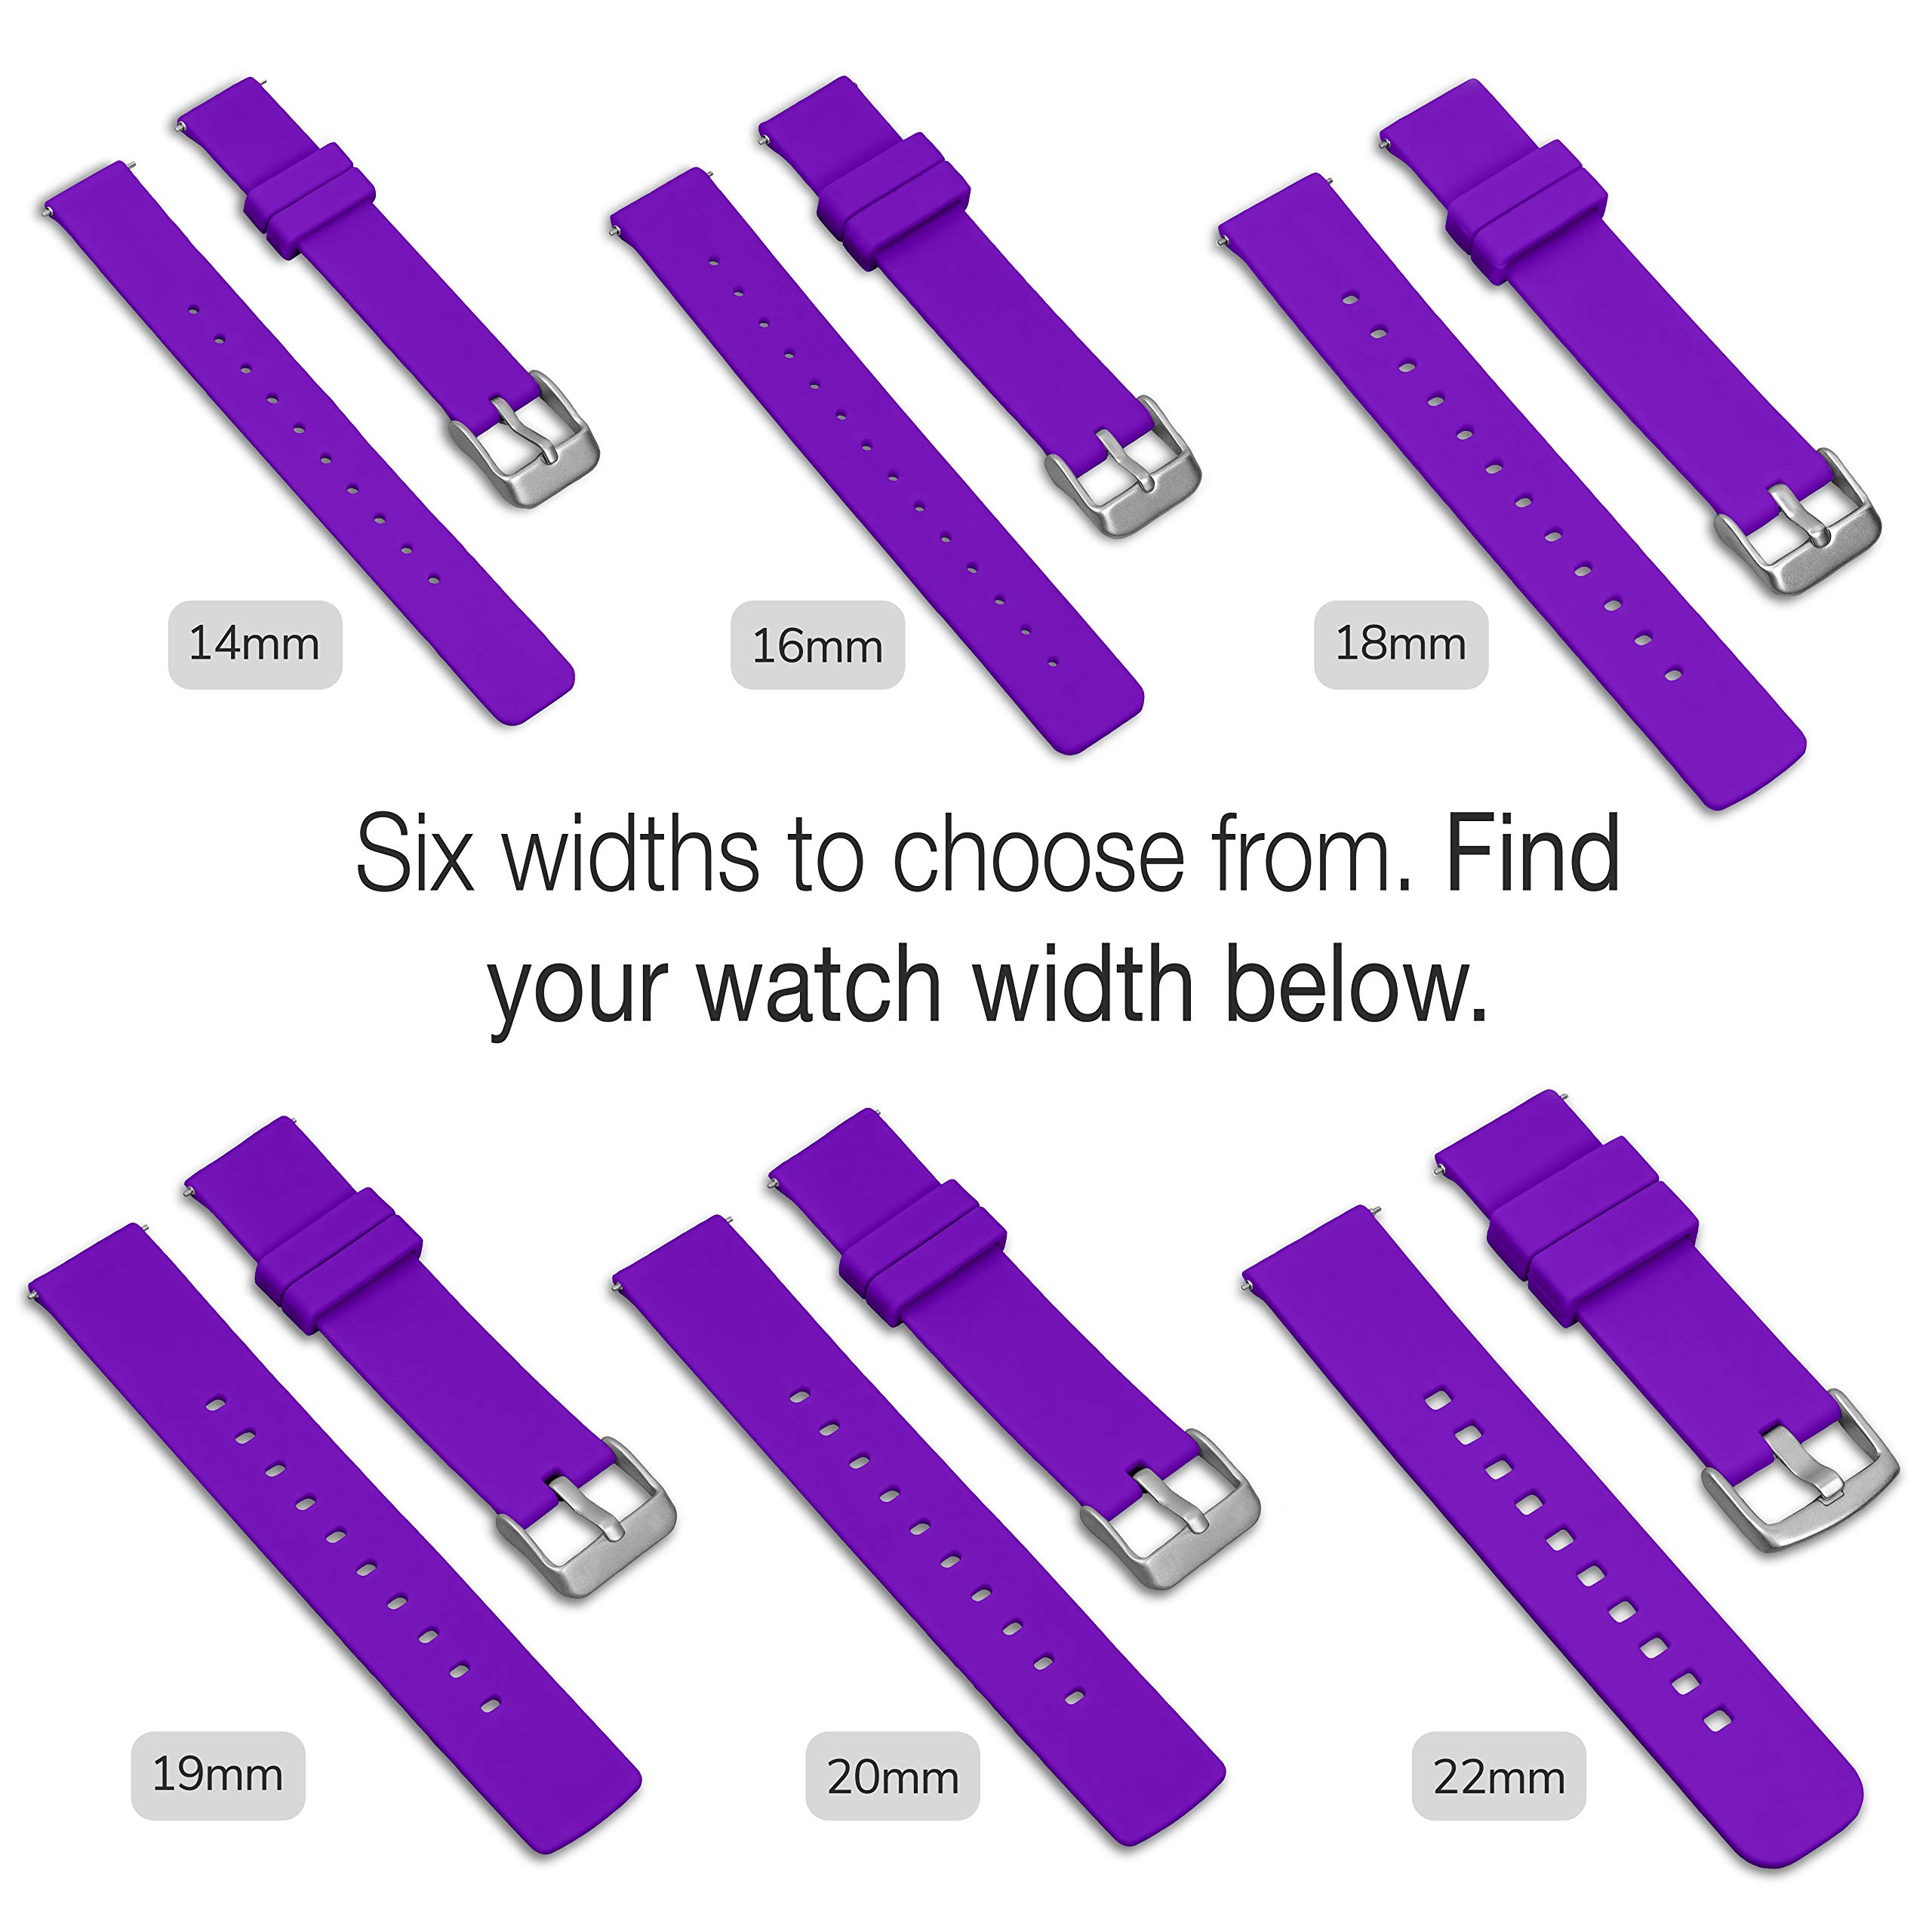 GadgetWraps 20mm Gizmo Watch Silicone Watch Band Strap with Quick Release Pins – Compatible with Gizmo Watch, Samsung, Pebble – 20mm Quick Release Watch Band (Medium Purple, 20mm)